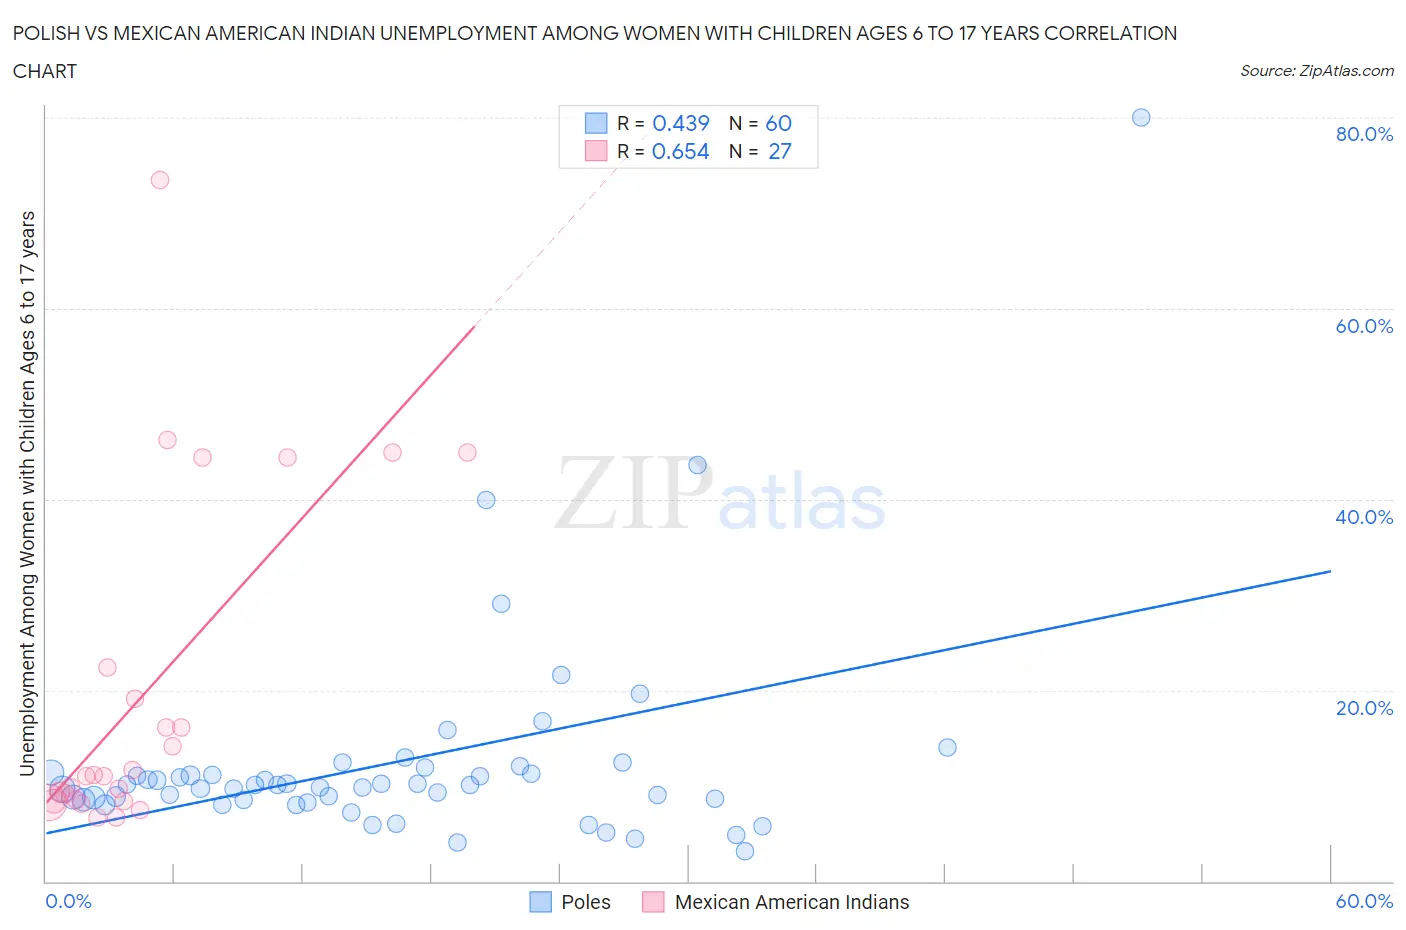 Polish vs Mexican American Indian Unemployment Among Women with Children Ages 6 to 17 years